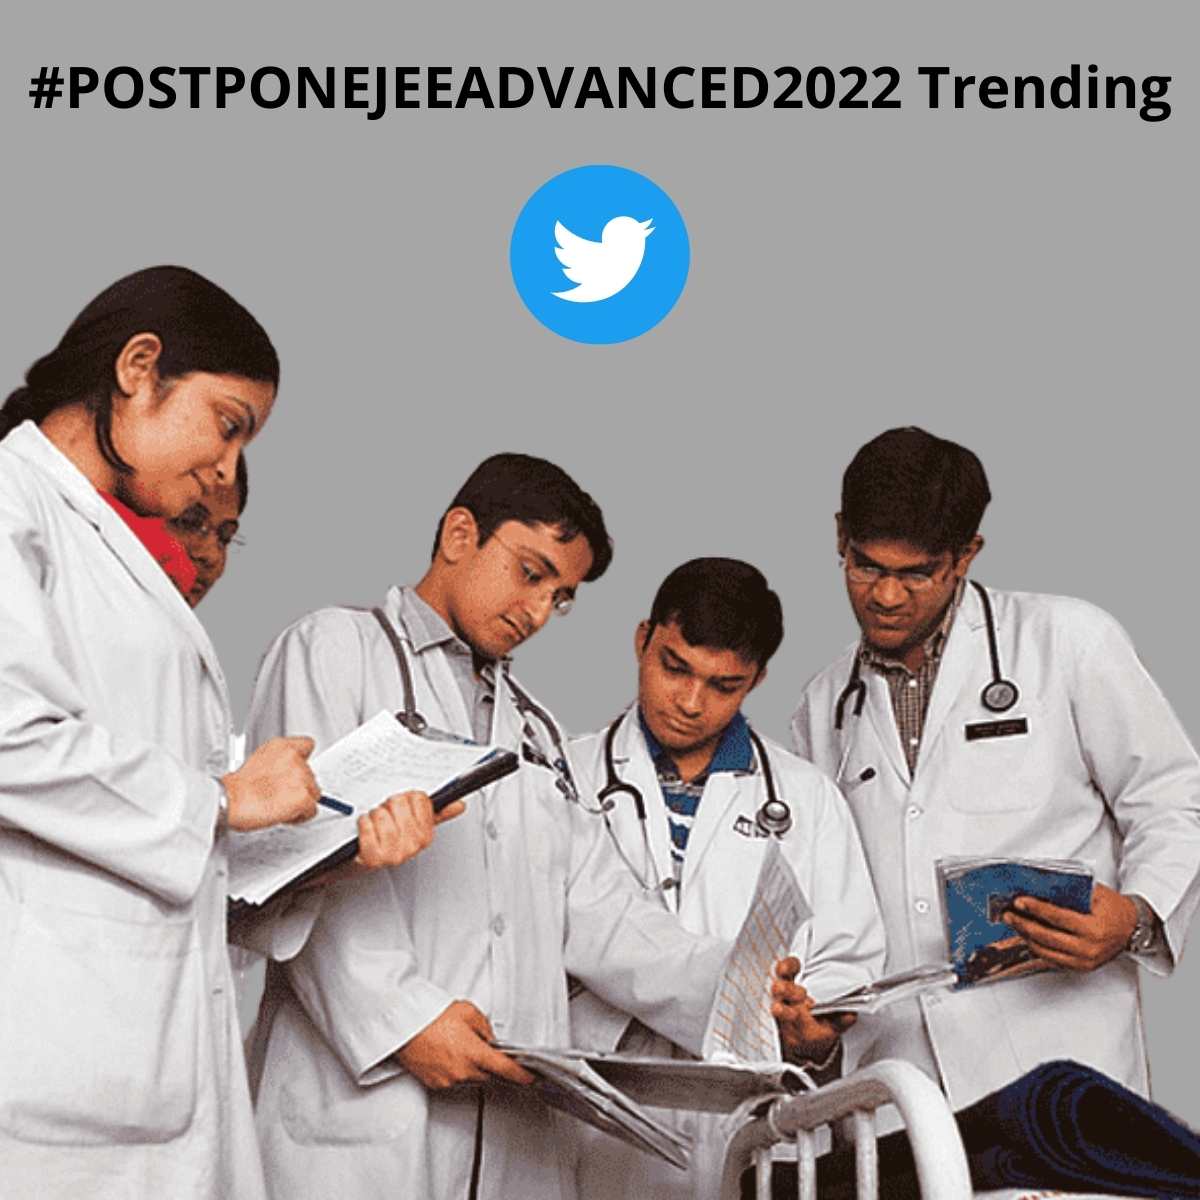 Why is #POSTPONEJEEADVANCED2022 trending, know here